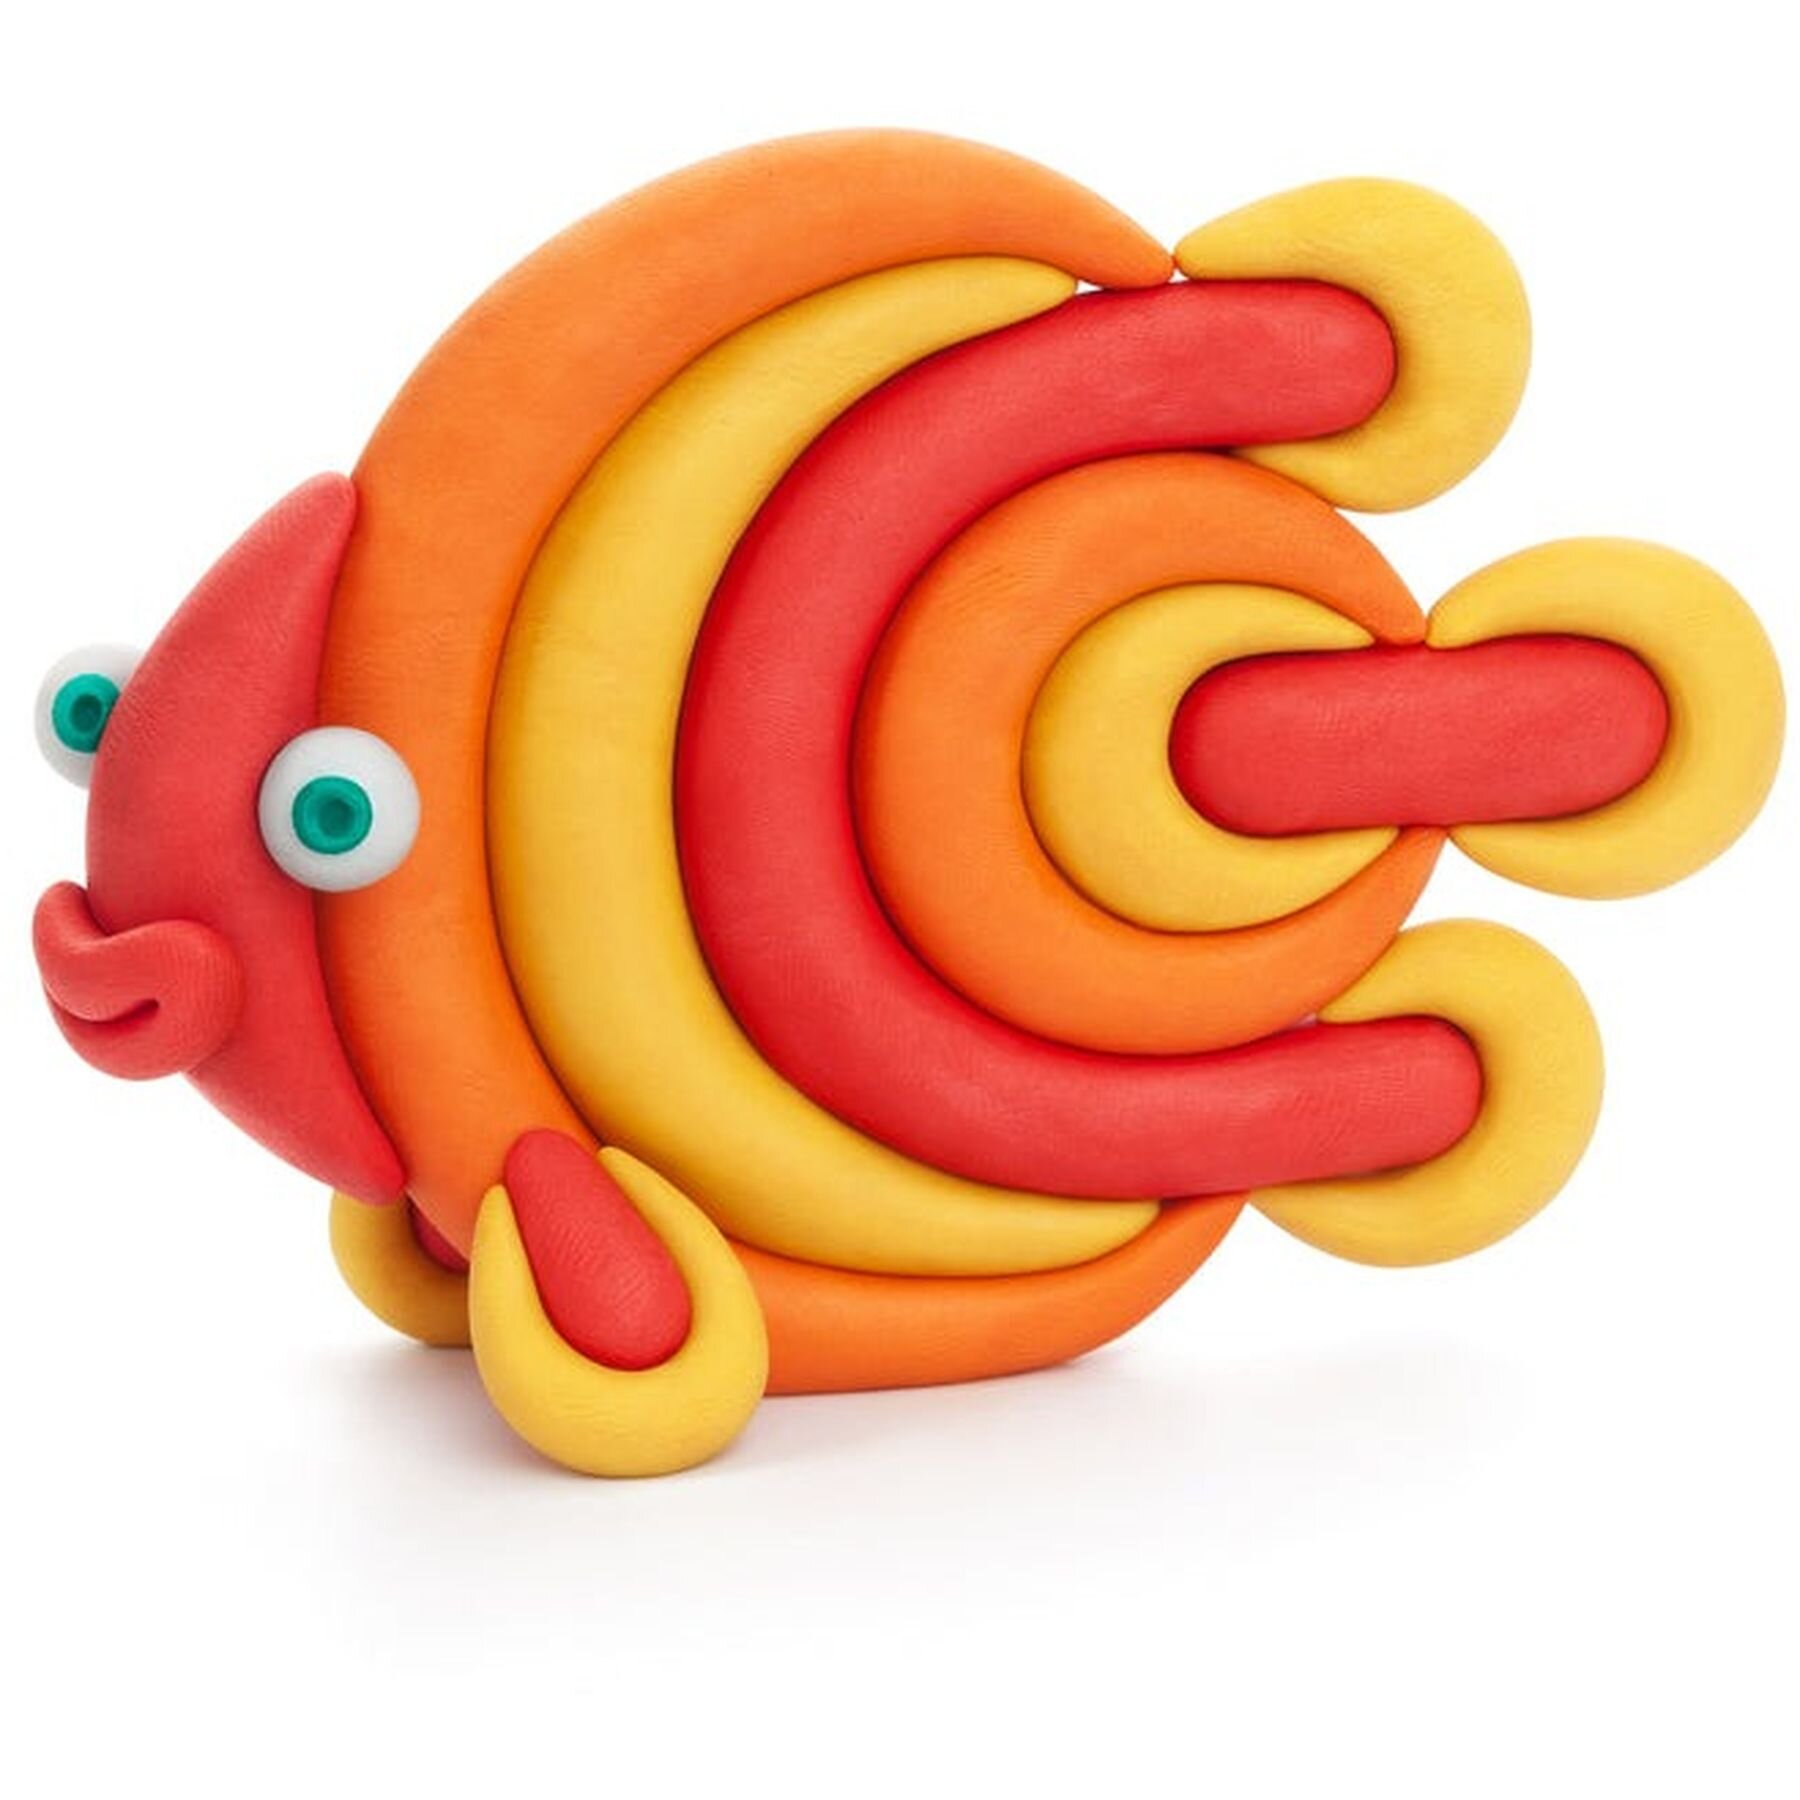 HEY CLAY - OCEAN (CLOWNFISH, DISCUS, FISH, EEL), 6 CANS – Logical Toys